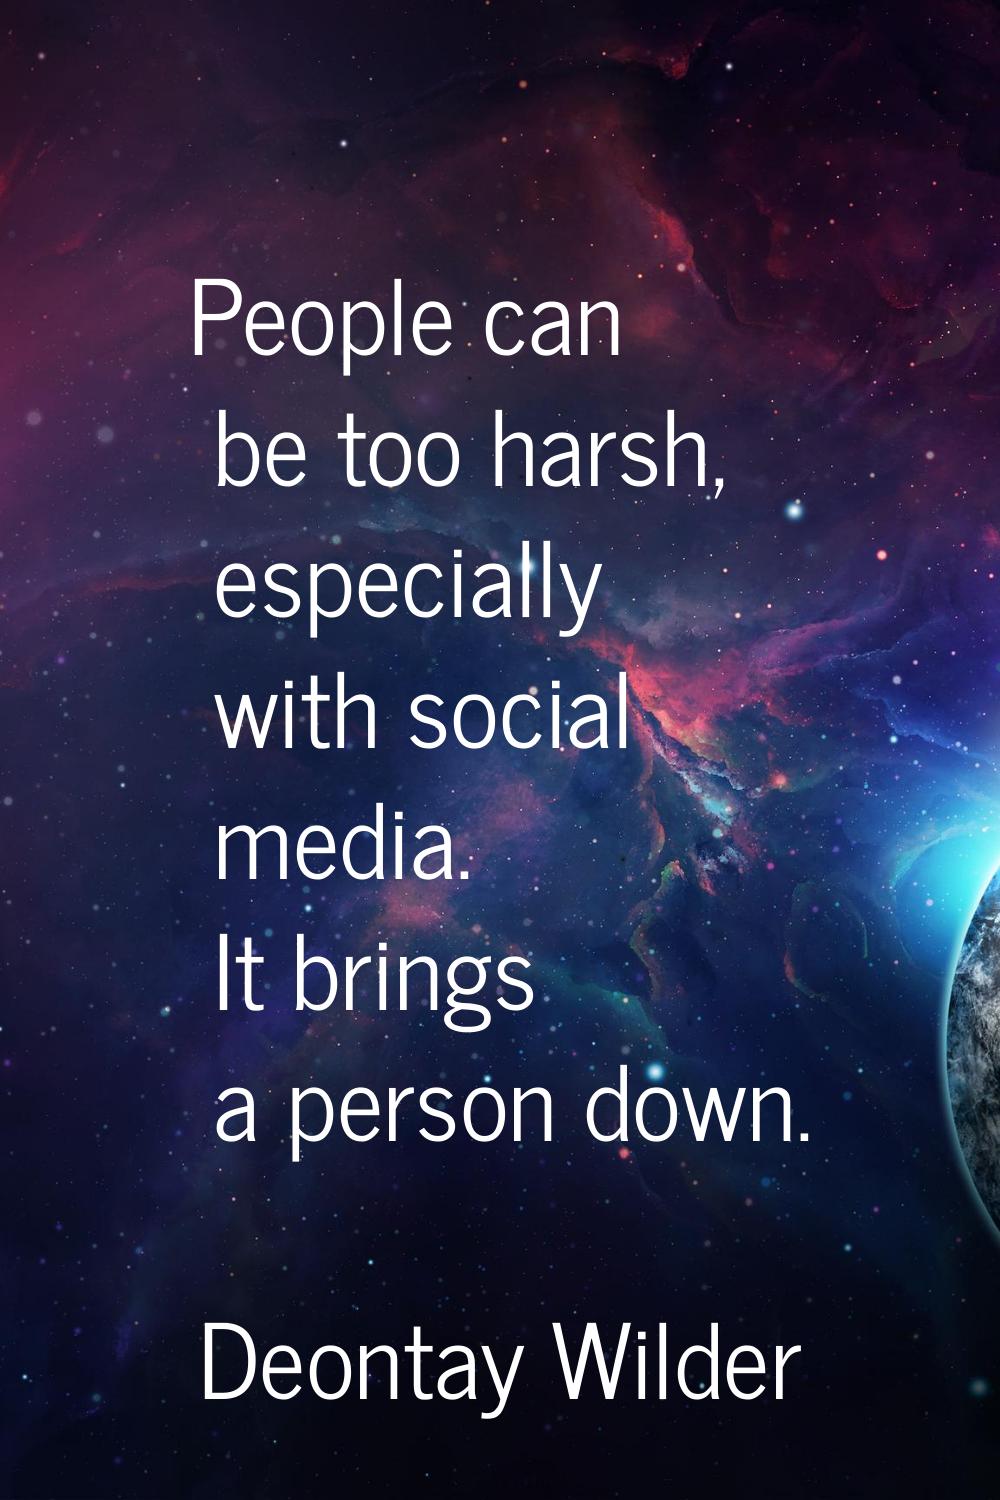 People can be too harsh, especially with social media. It brings a person down.